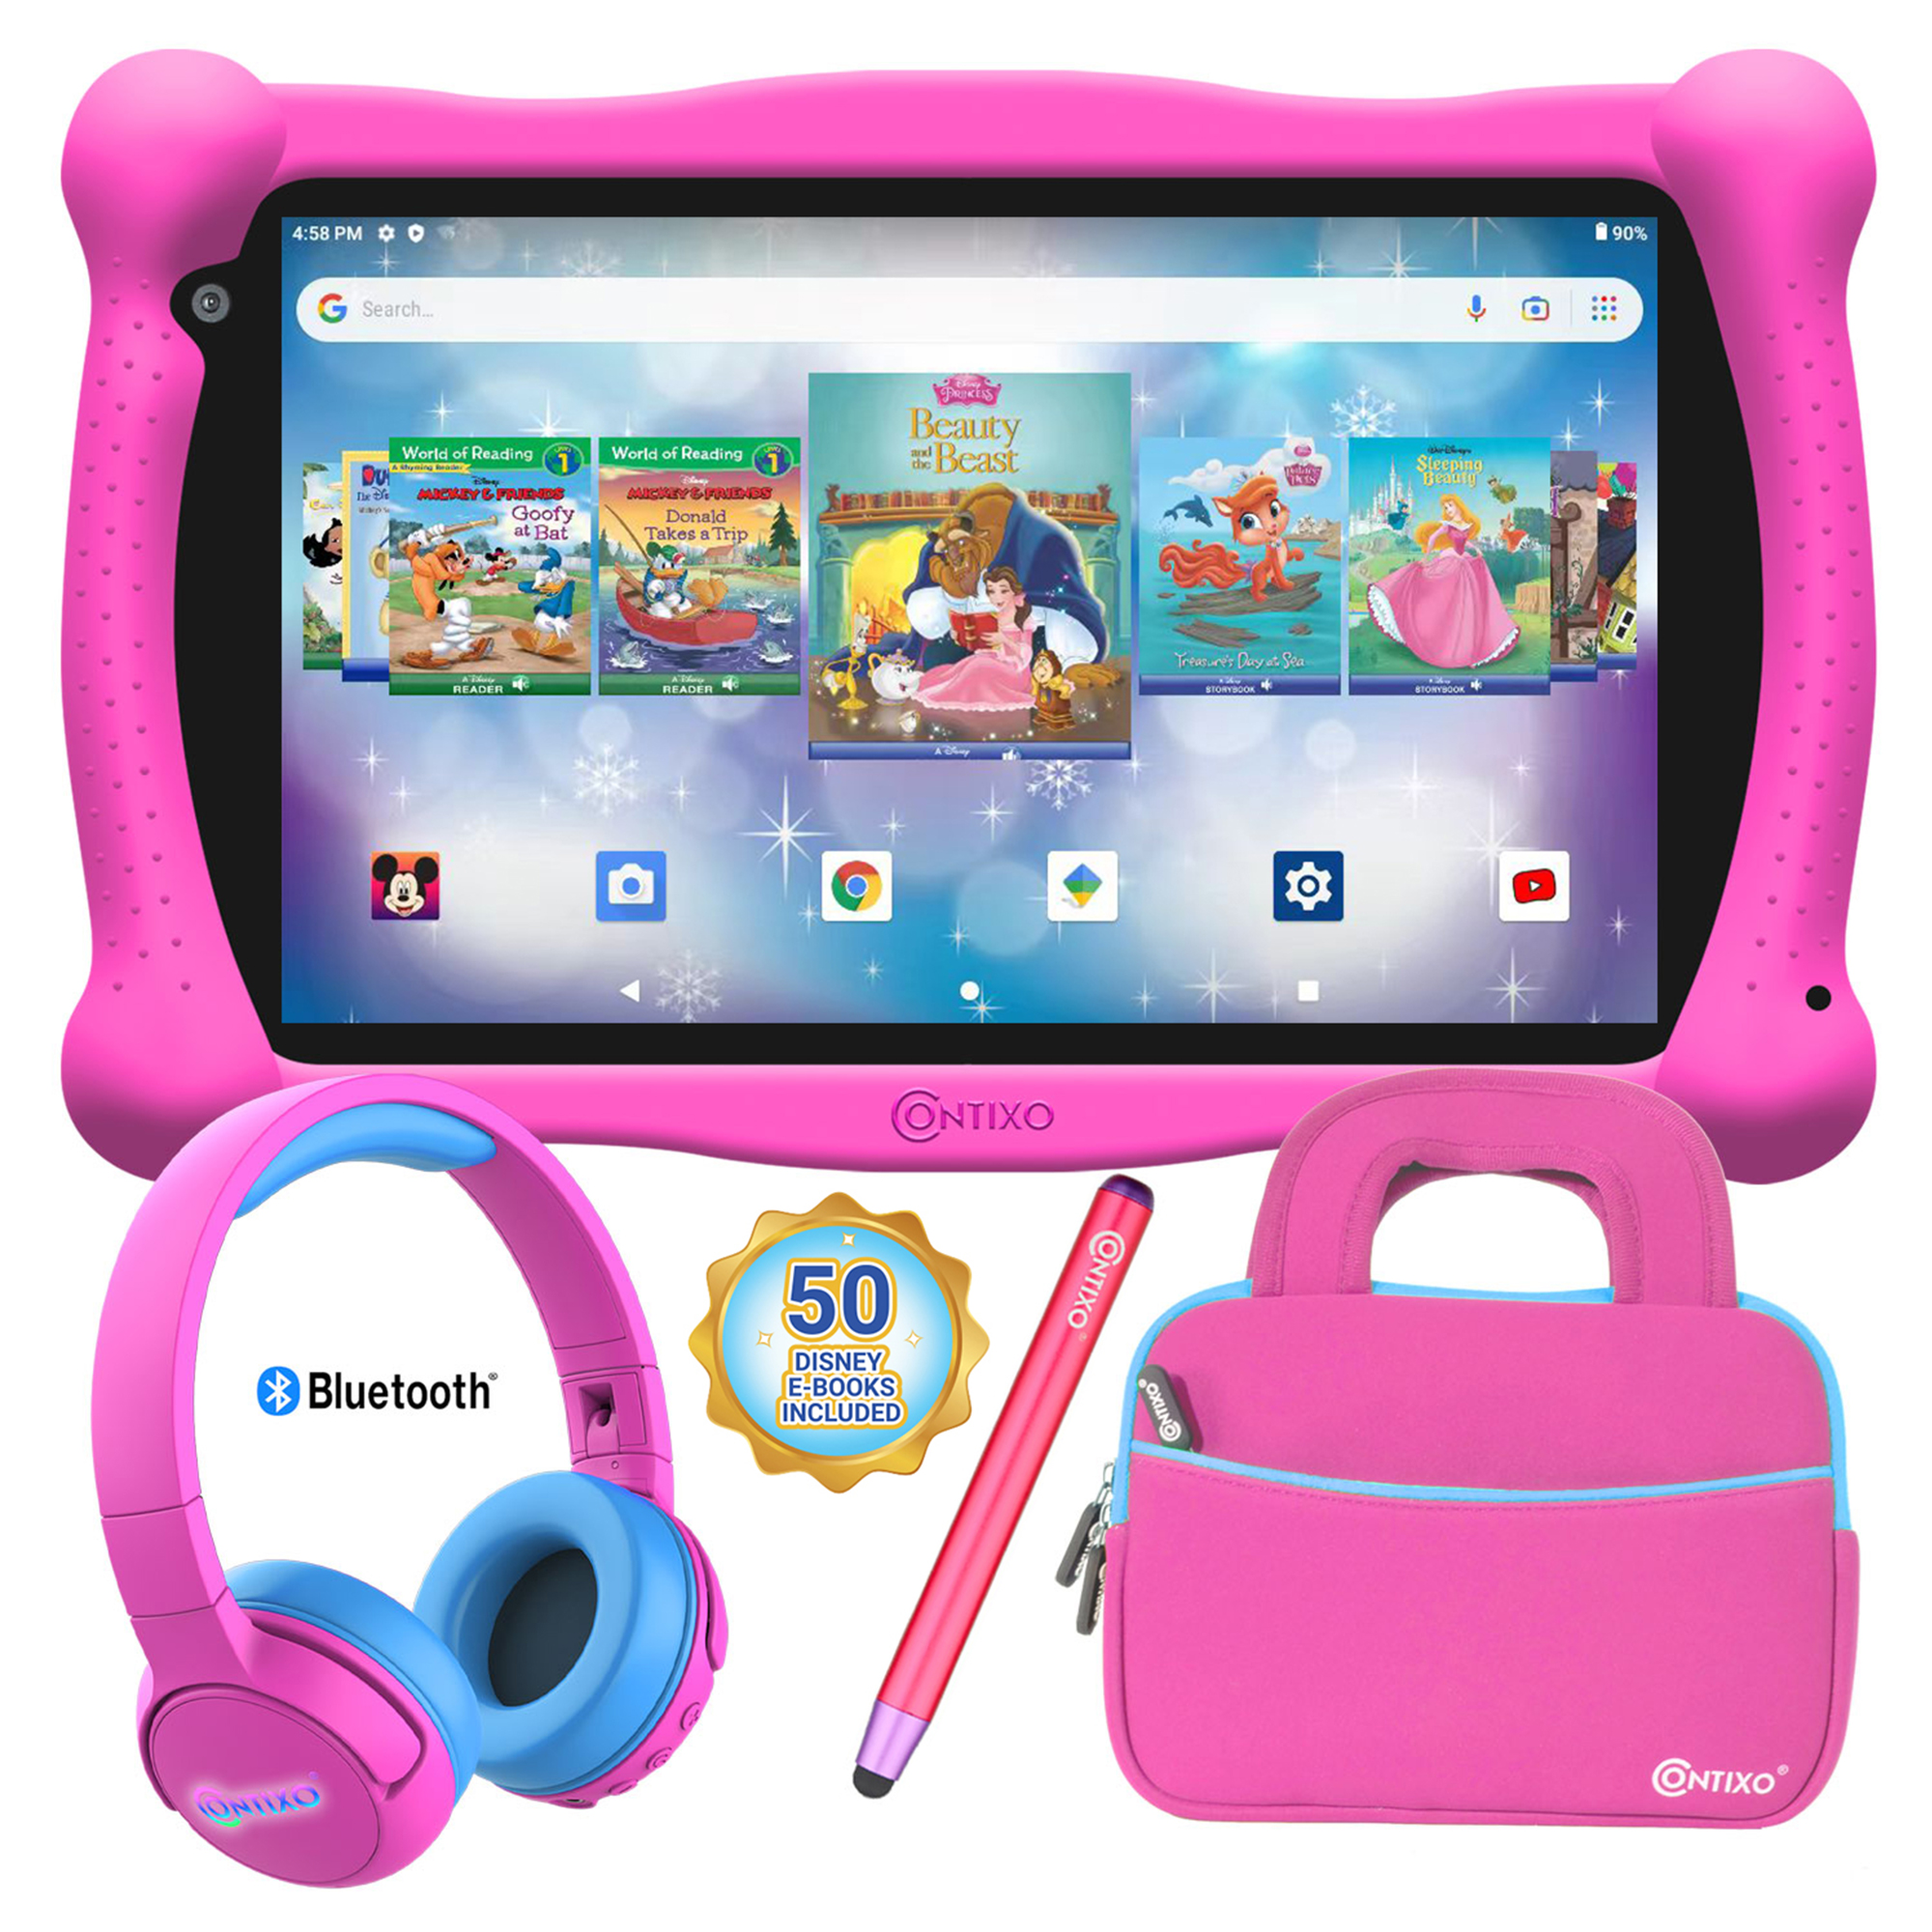 Contixo V10 7" Kids Tablet, with Headphone and Tablet Bag Bundle, 32GB Storage, 50+ Disney eBooks, Shockproof Case w/ Kickstand and Stylus - Pink - image 1 of 7